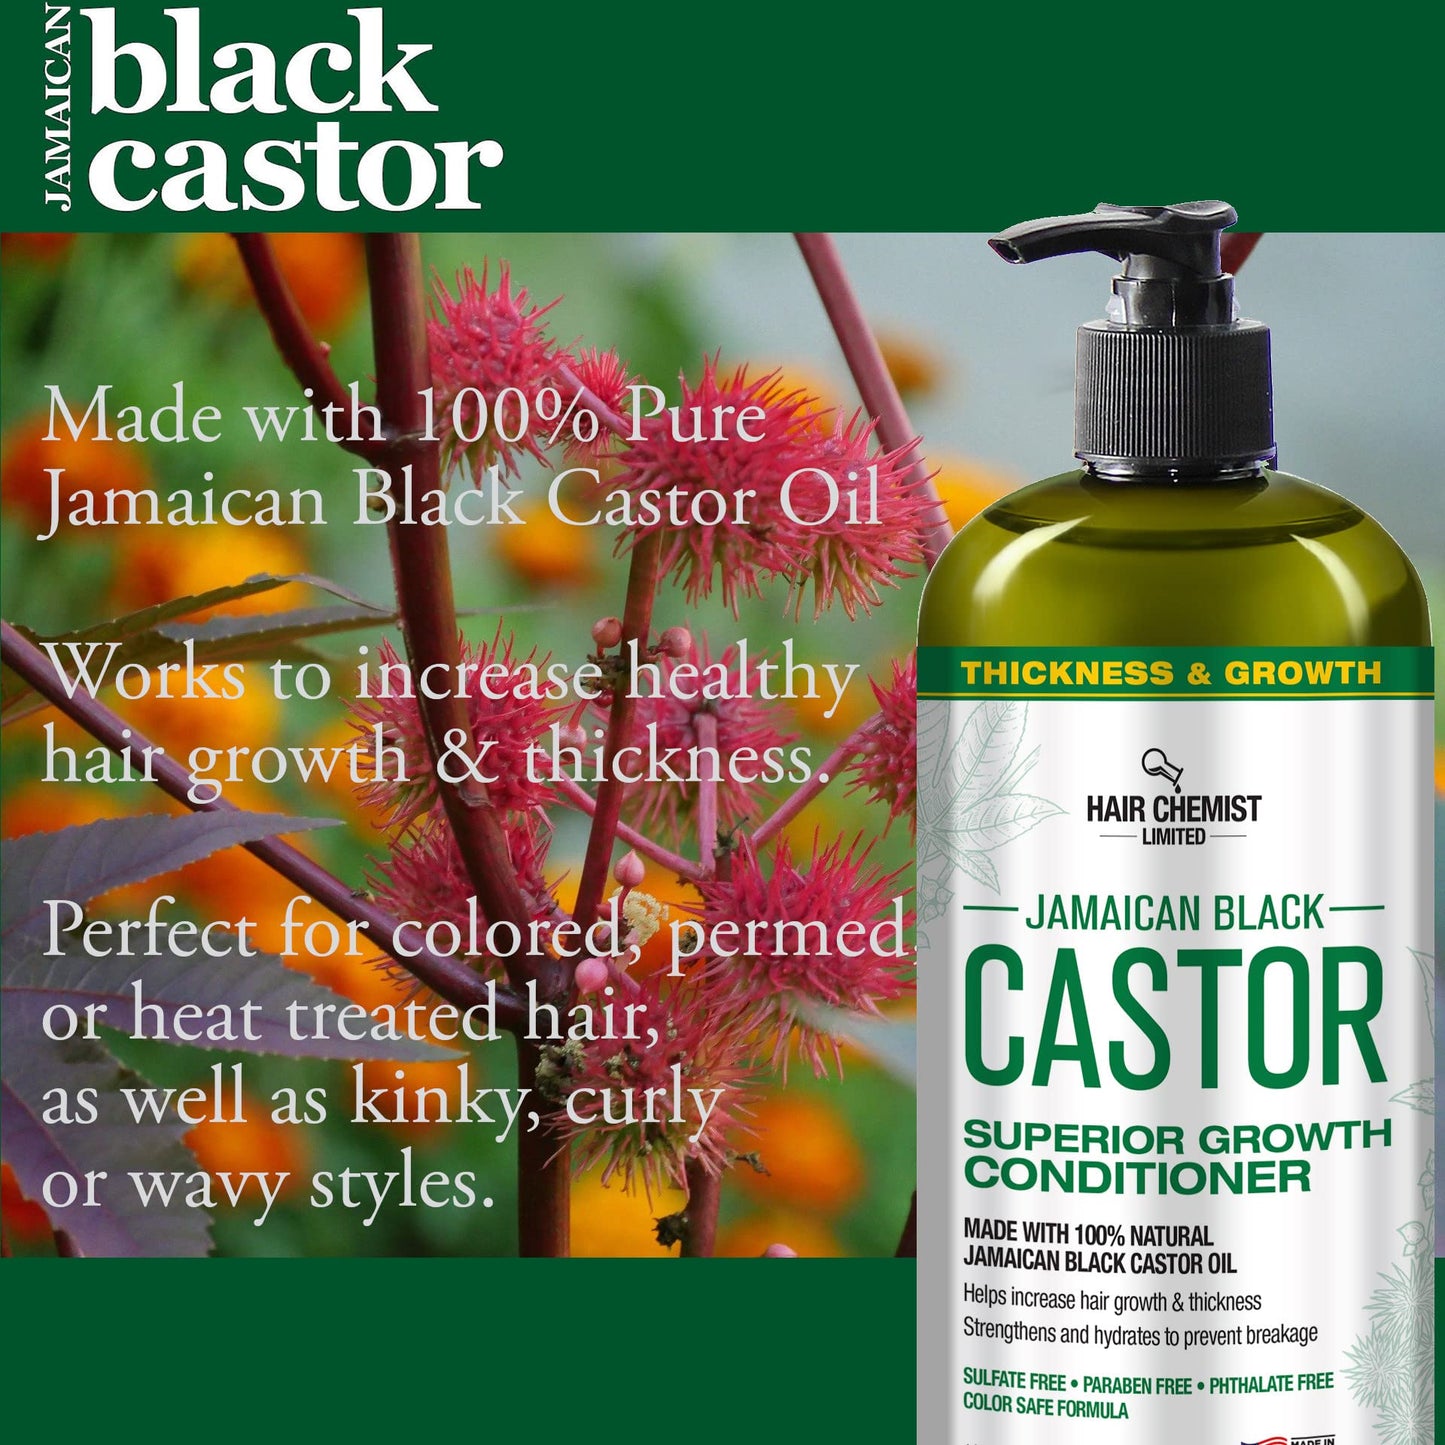 Hair Chemist Superior Growth Jamaican Black Castor Conditioner 33.8 oz. - Sulfate Free Conditioner made with Natural Ingredients